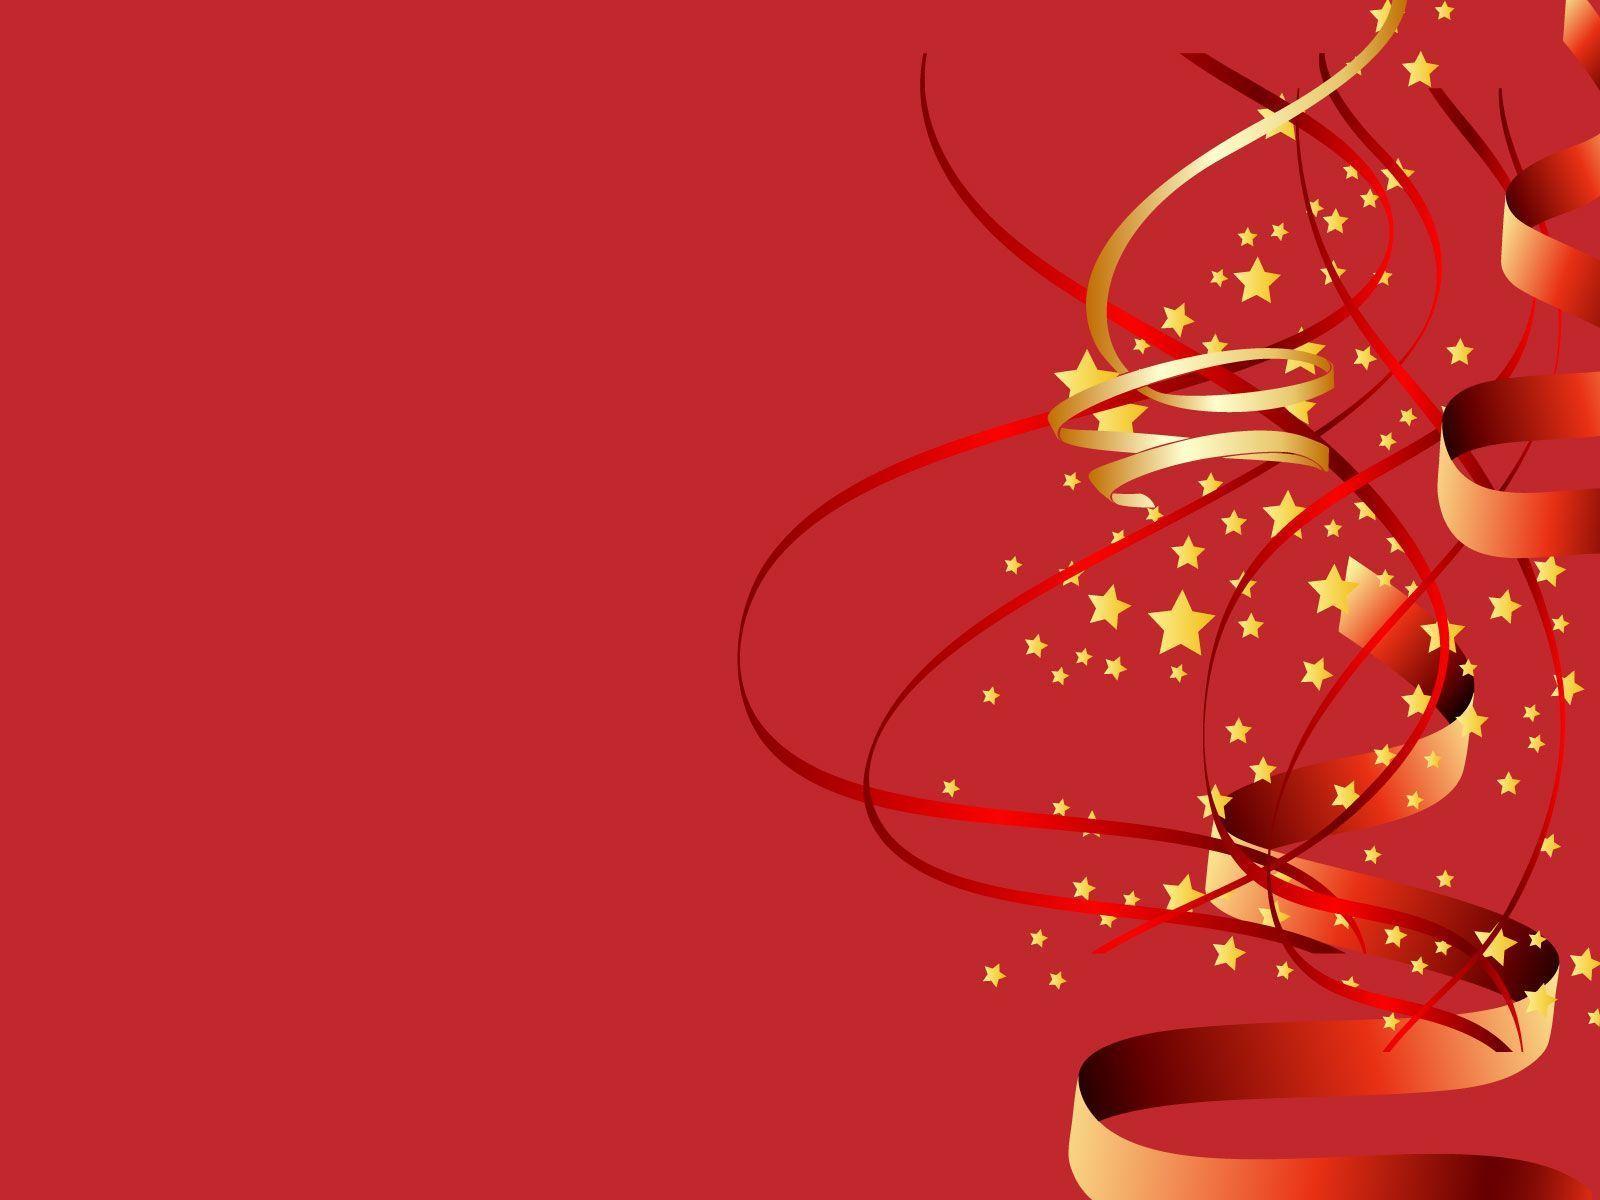 New Years Backgrounds For Desktop Wallpaper Cave Christmas And